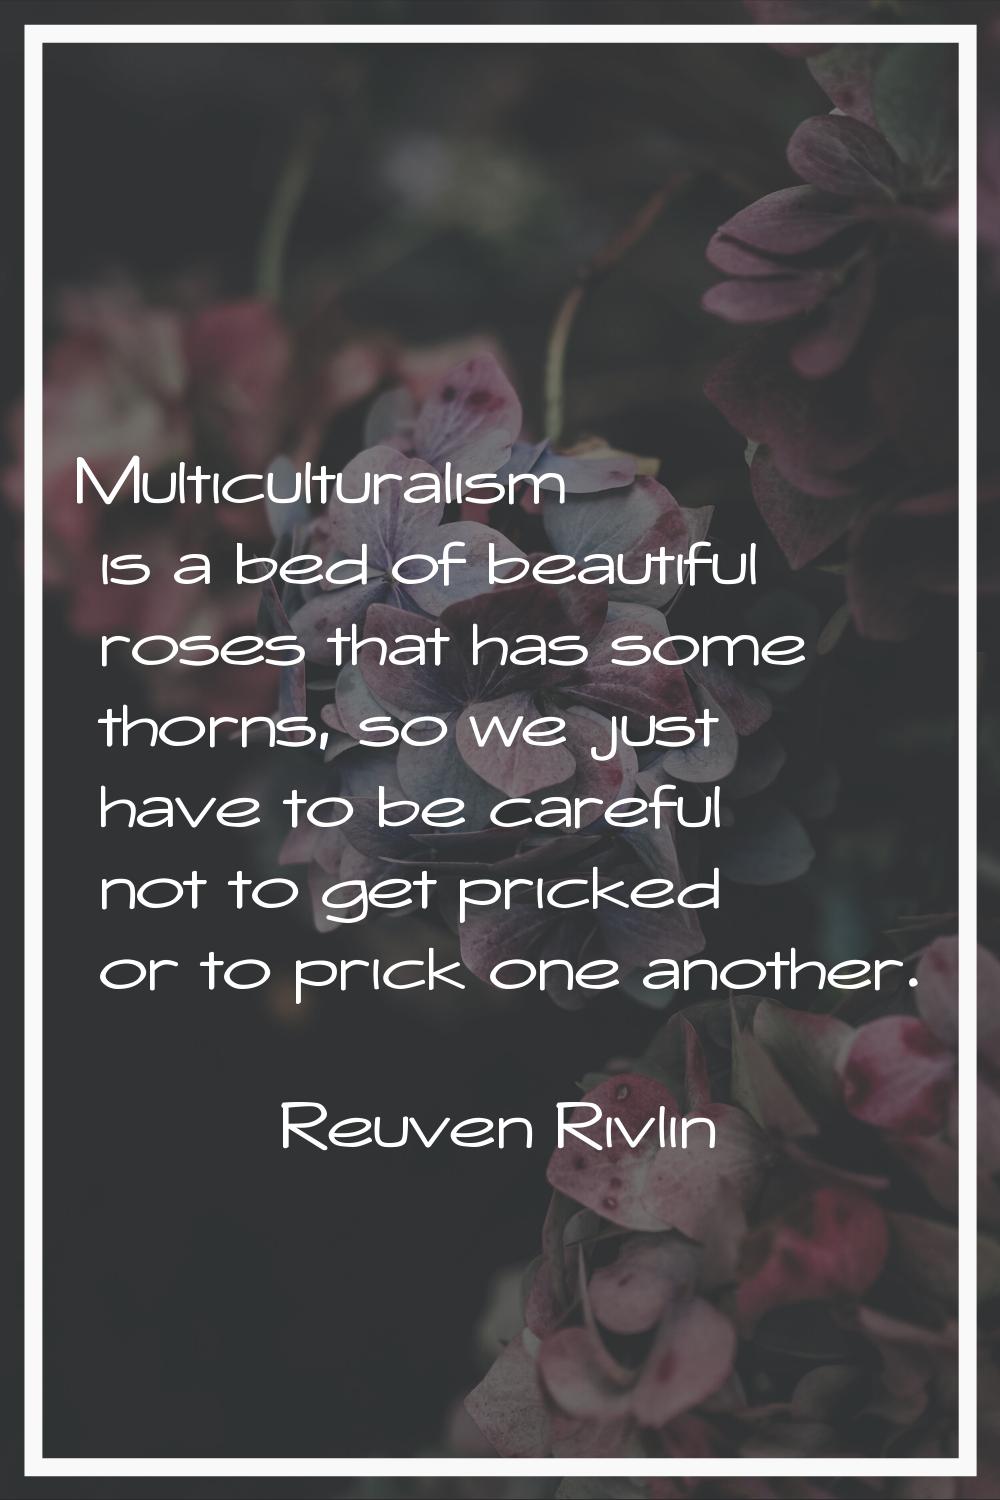 Multiculturalism is a bed of beautiful roses that has some thorns, so we just have to be careful no